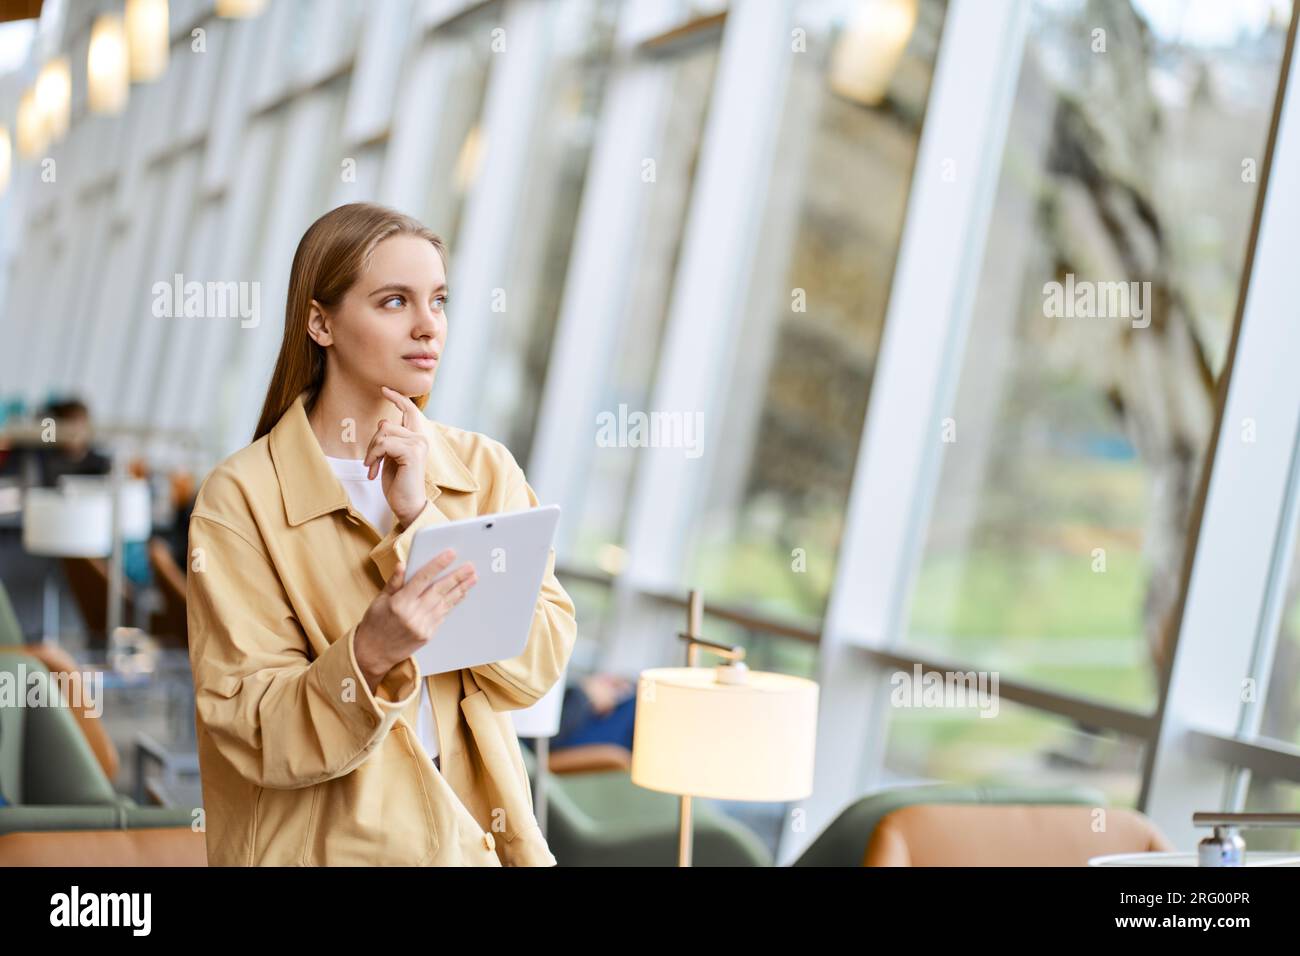 Thoughtful girl student using digital tablet looking away. Copy space Stock Photo